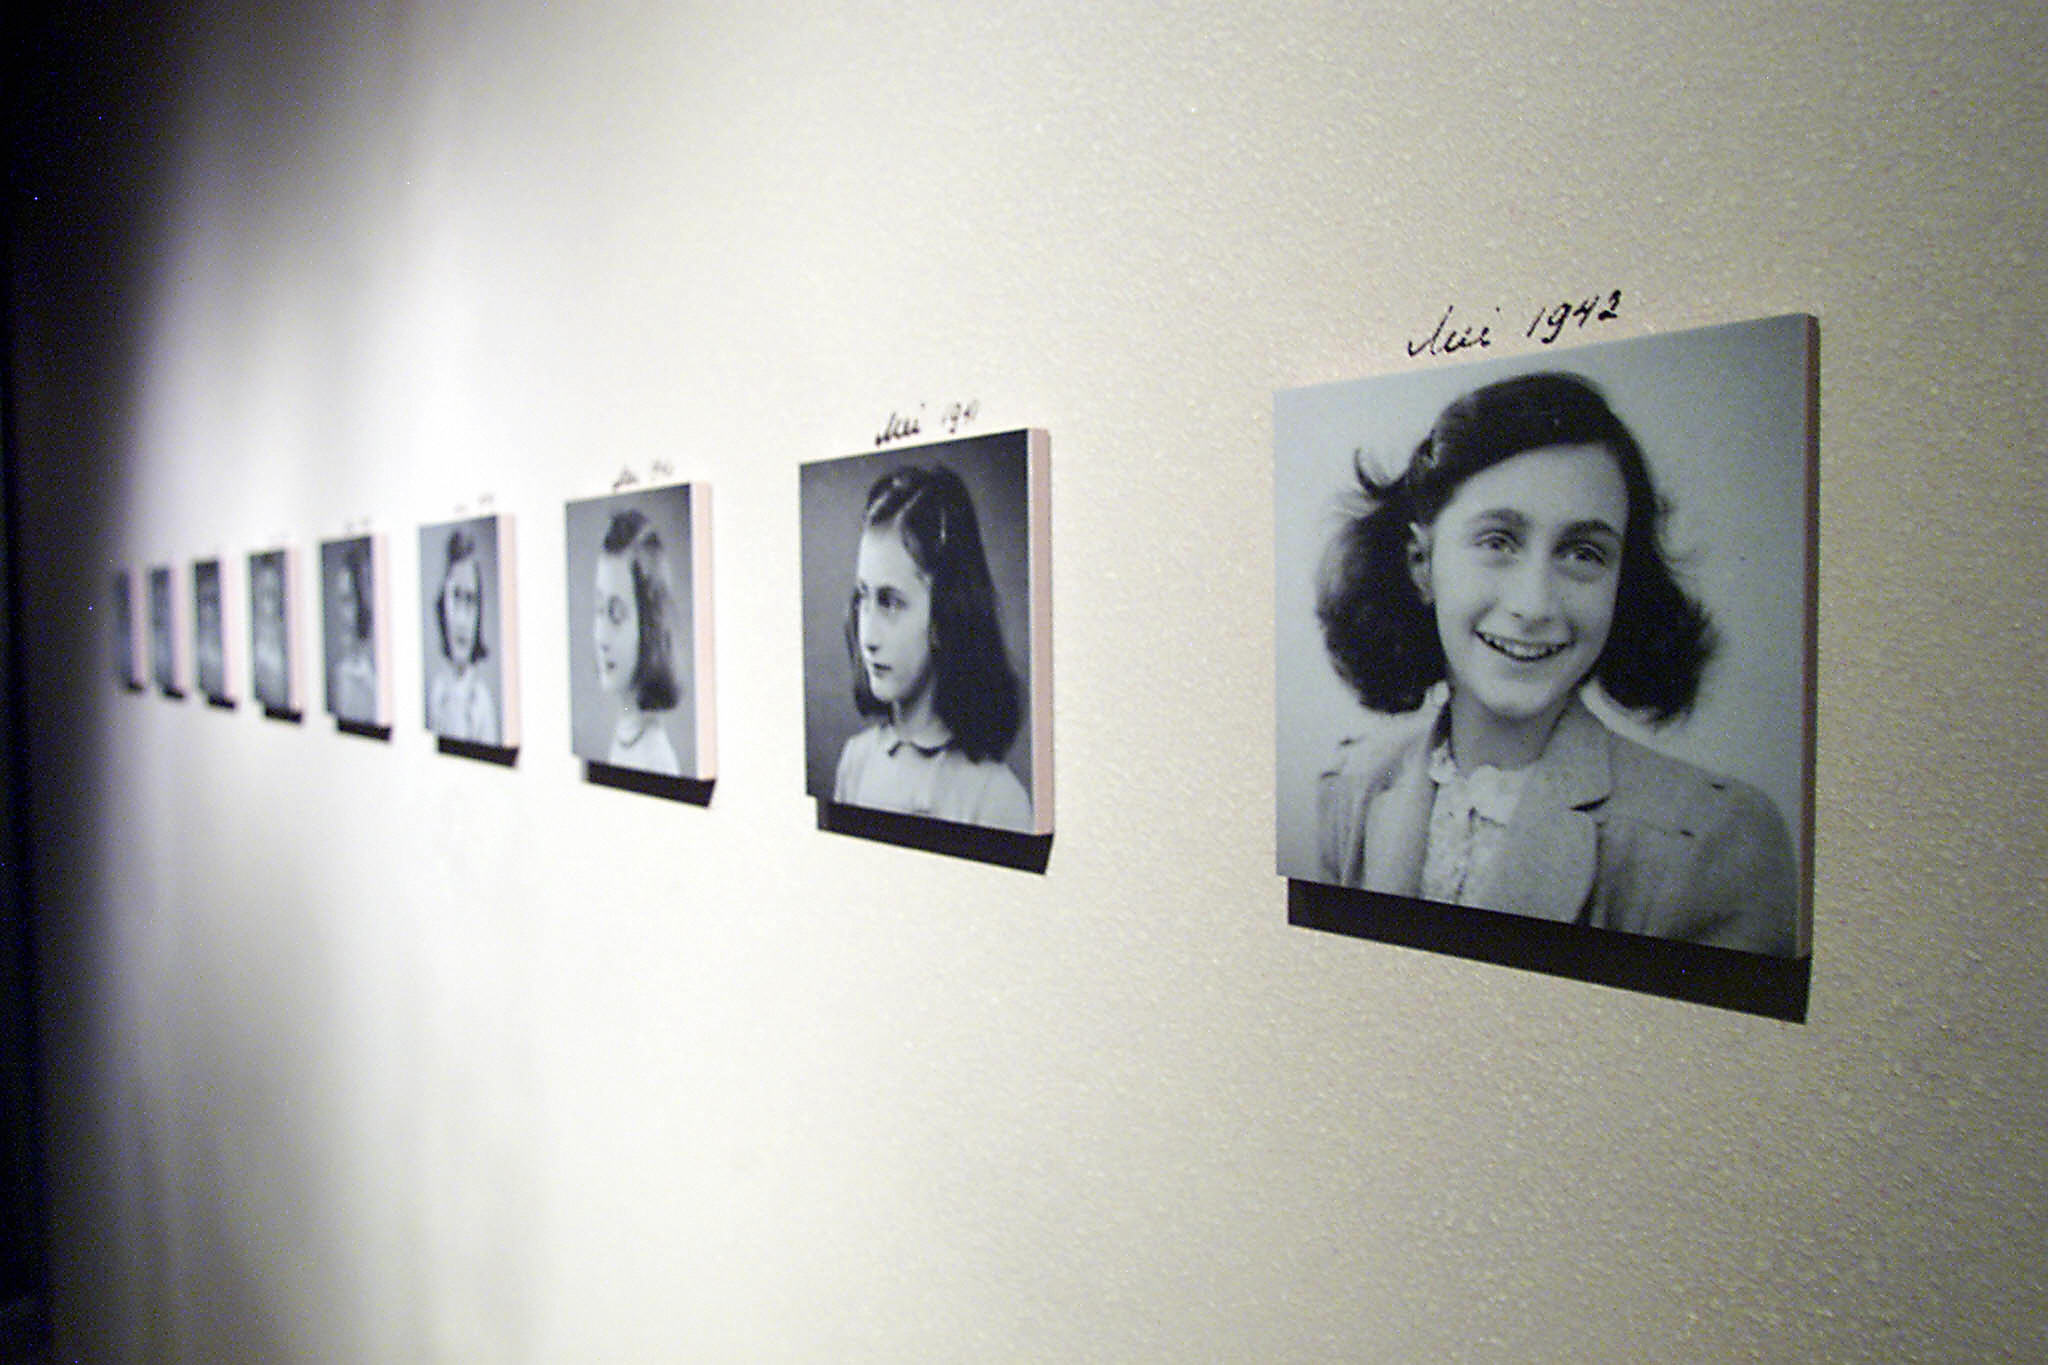 anne frank quotes